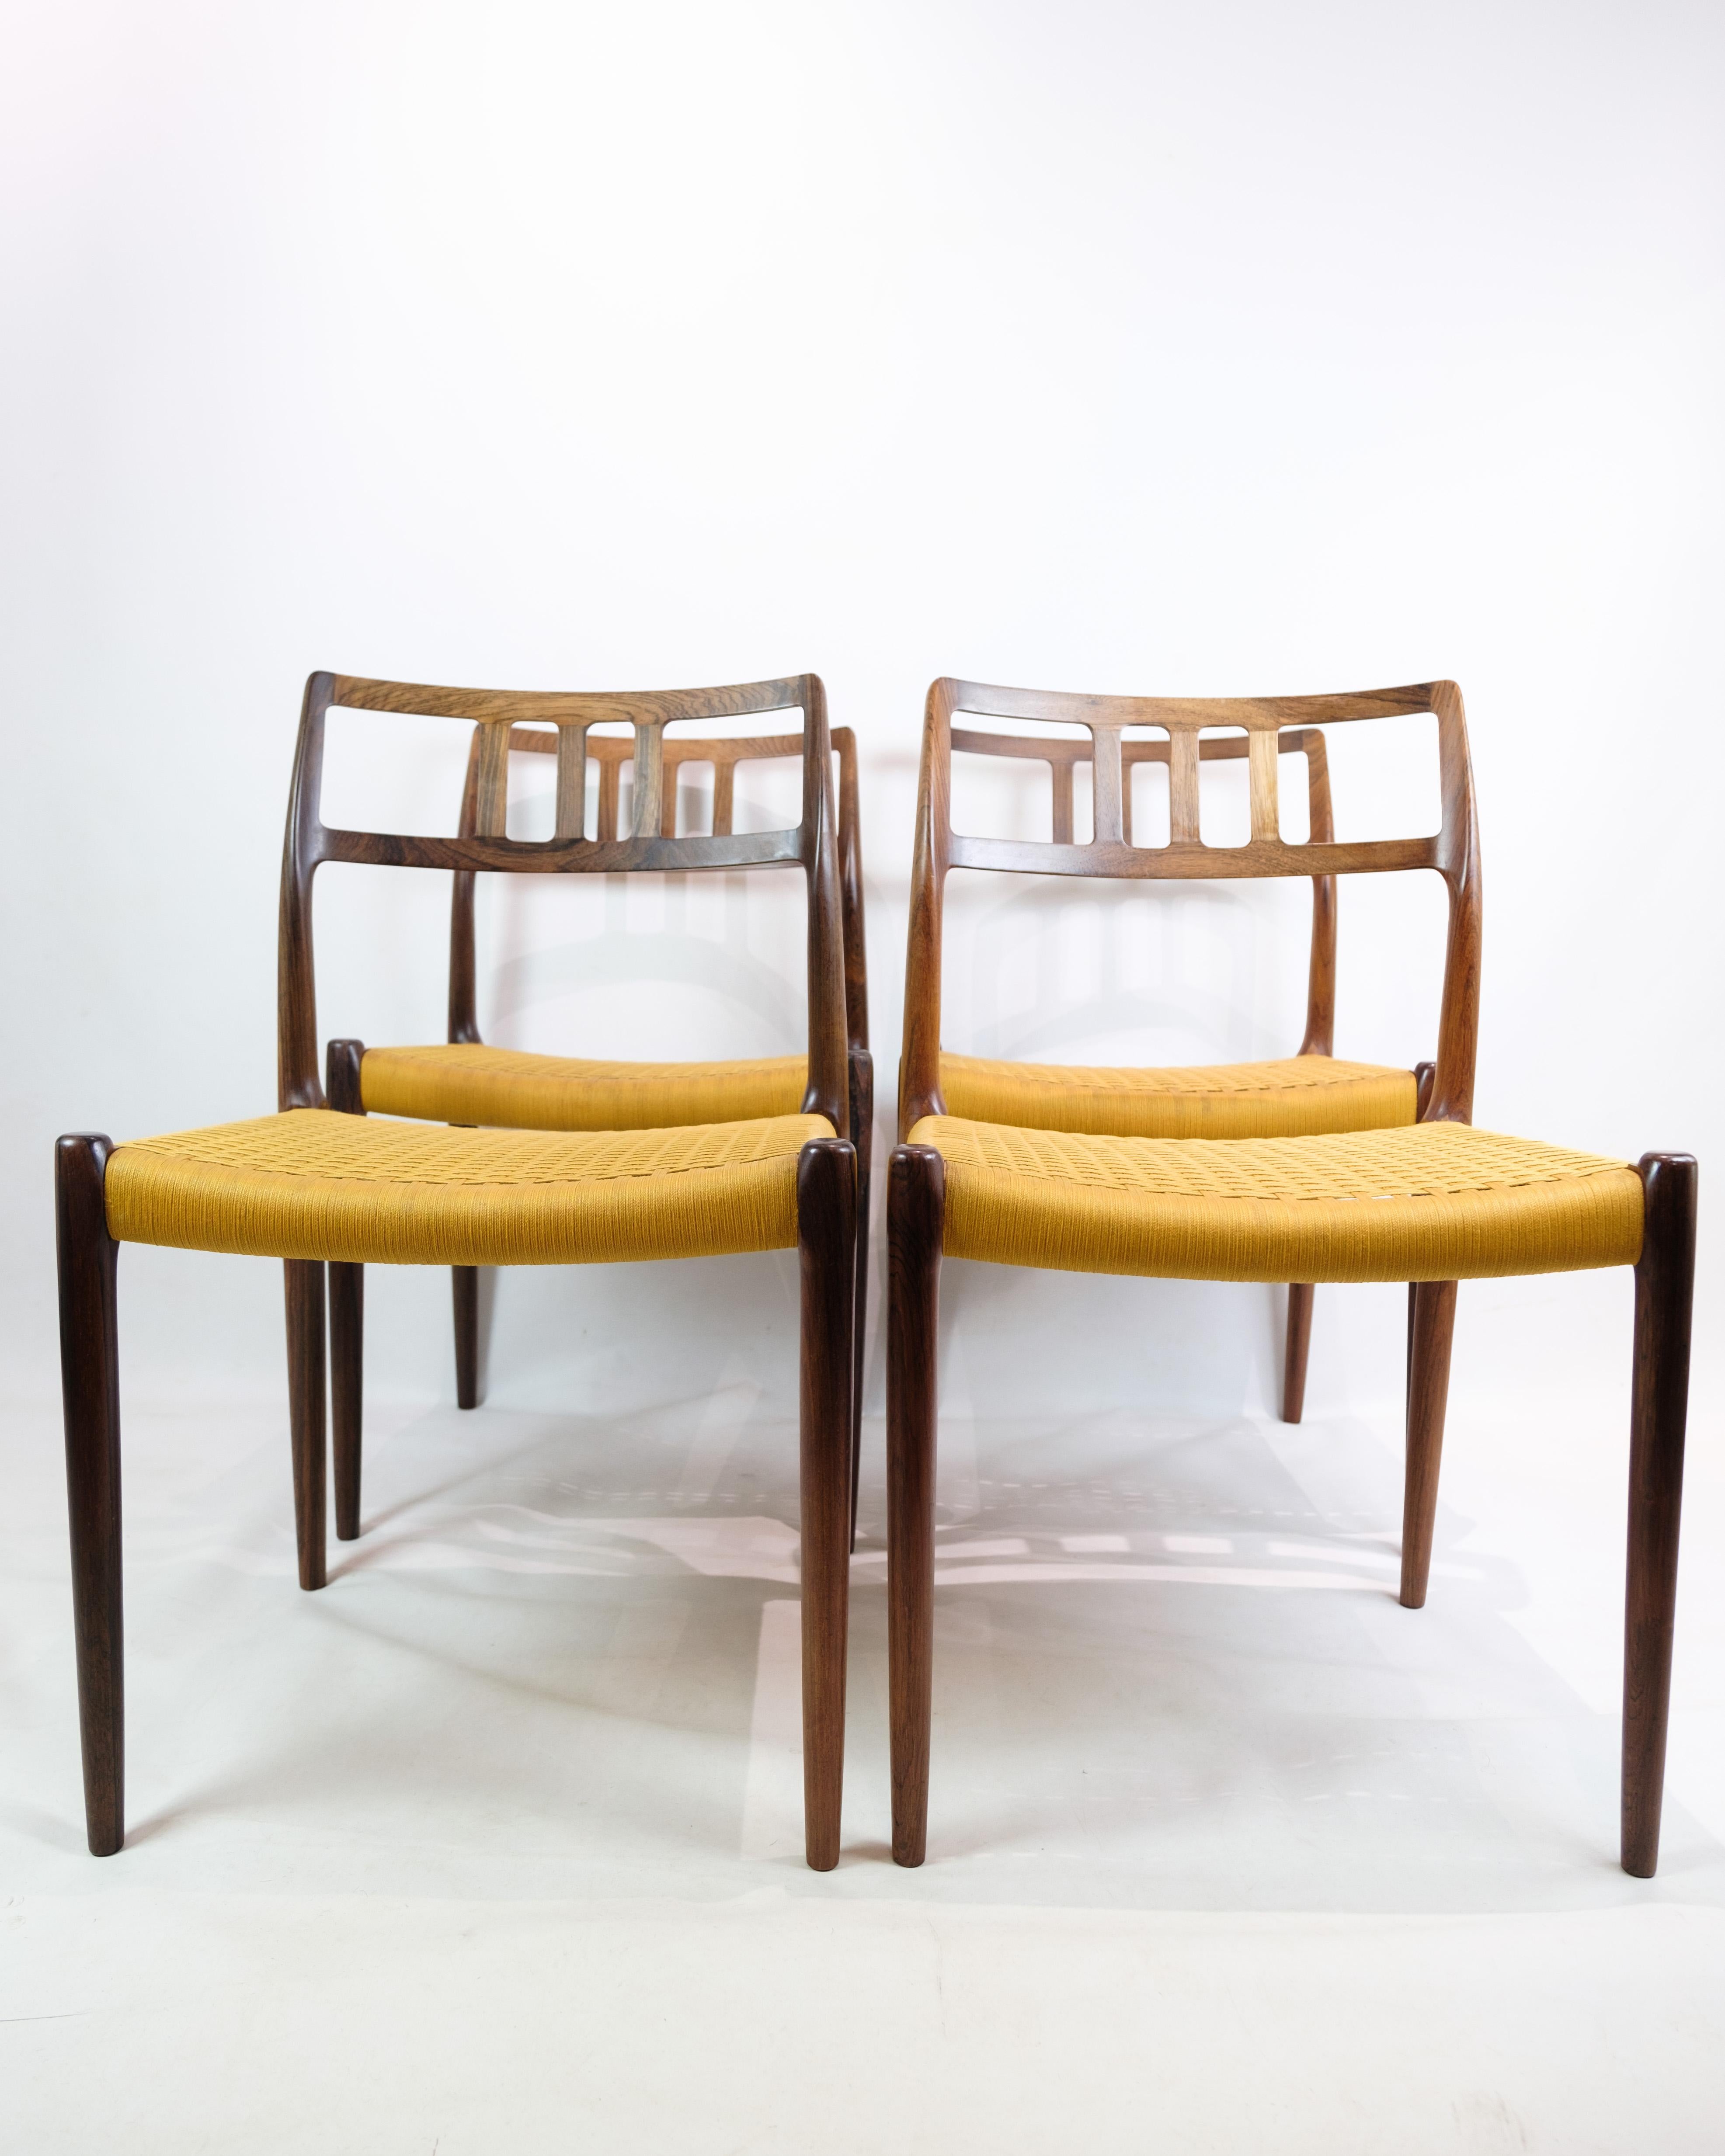 Set of four dining chairs, Model 79, designed by Niels O. Møller and produced by J.L. Møller Møbelfabrik around 1960. These chairs represent an iconic part of Danish furniture design history, where Niels O. Møller is known for his focus on